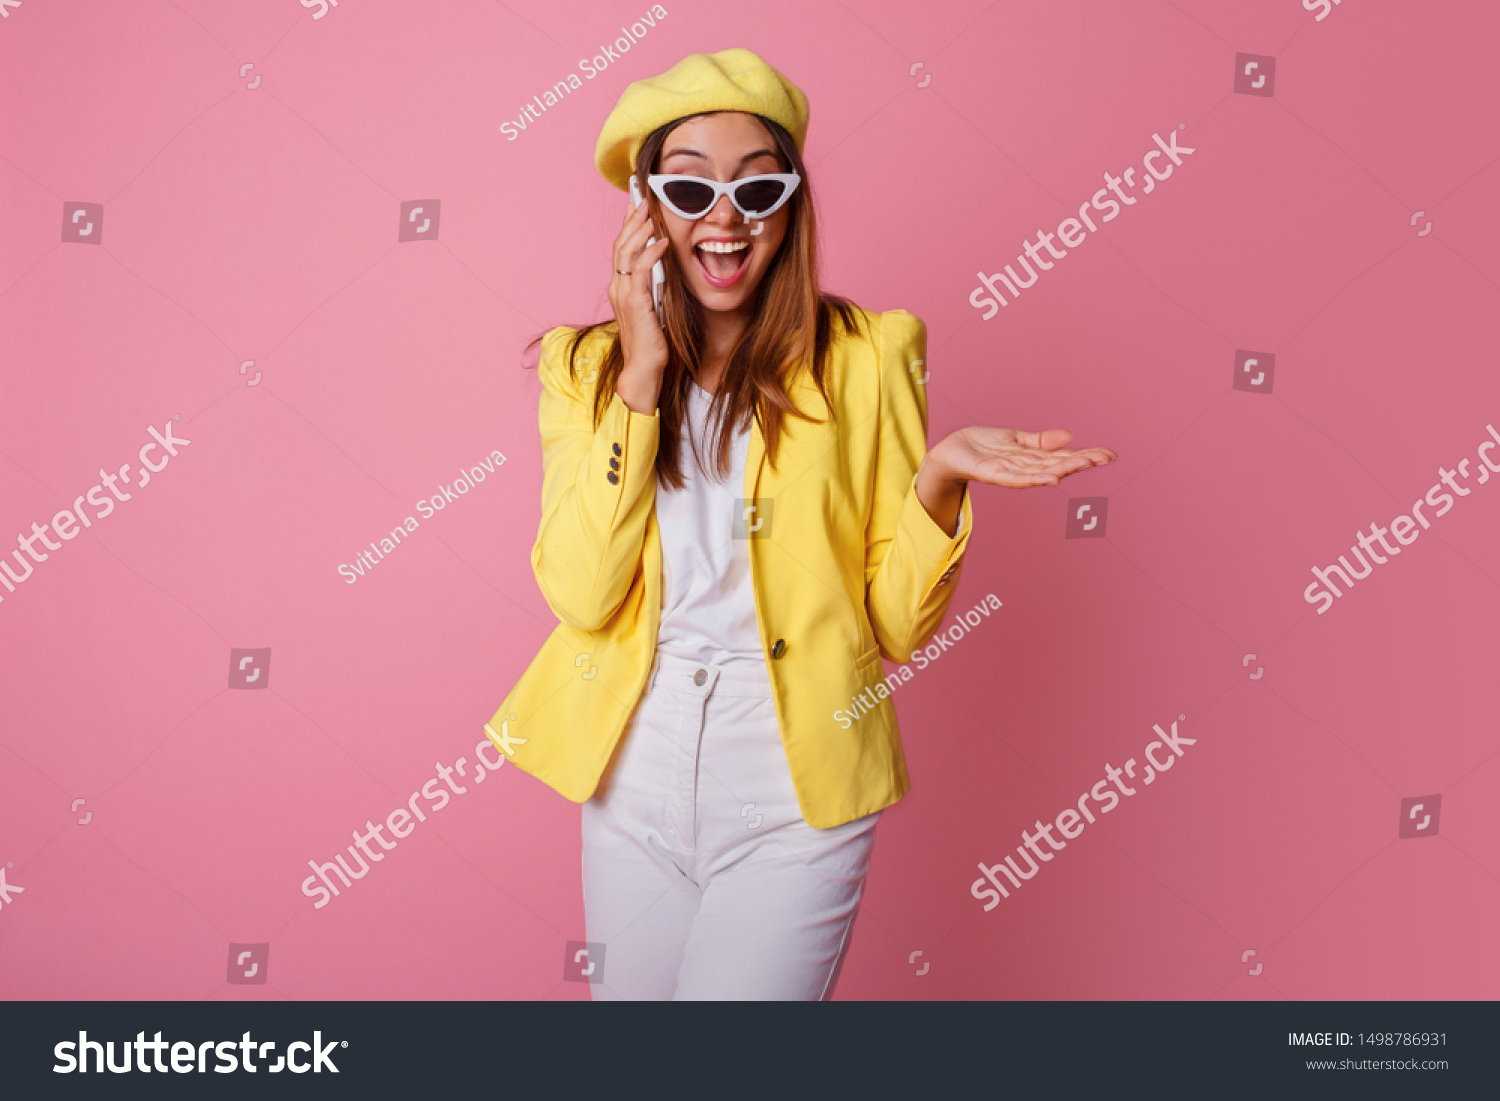 Stylish business woman talking by mobile phone with surprise emotions. Wearing yellow jacket and beret, standing over pink background. #1498786931